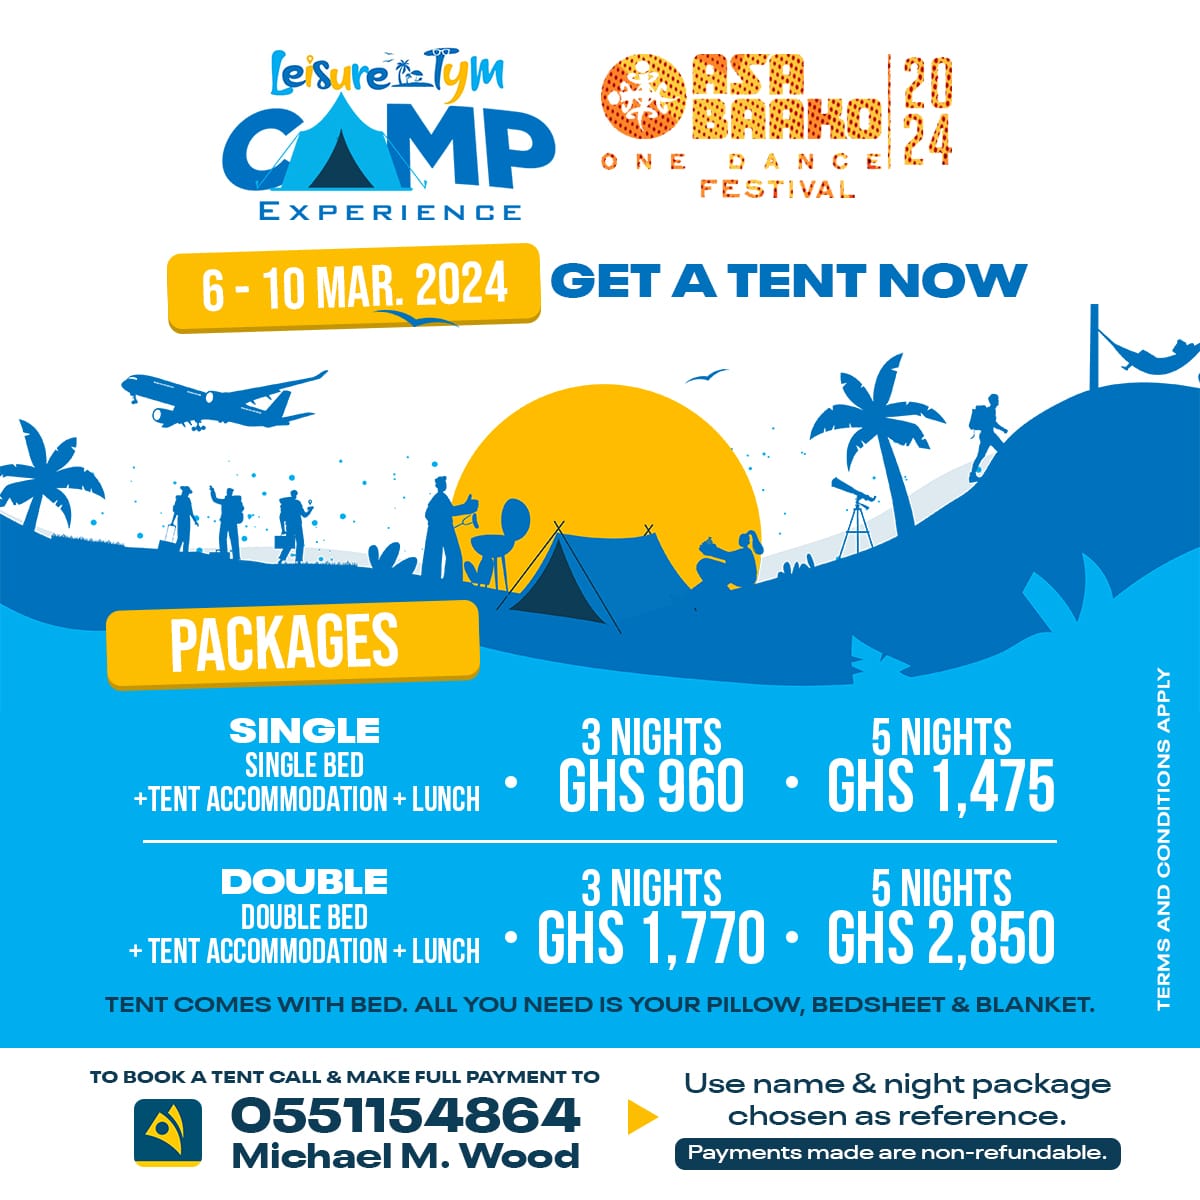 Limited Number of Cozy Camping Tent Accommodation In A Secured Eco Friendly Environment With Free Daily Lunch Available For Booking @asabaakofestival from 6th - 10th March 2024 (Leisure Camp - O.P.C. Busua)

Call / Whatsapp 055 1154 864 to book now!!!
#LeisureTym
#UnlockingWonder